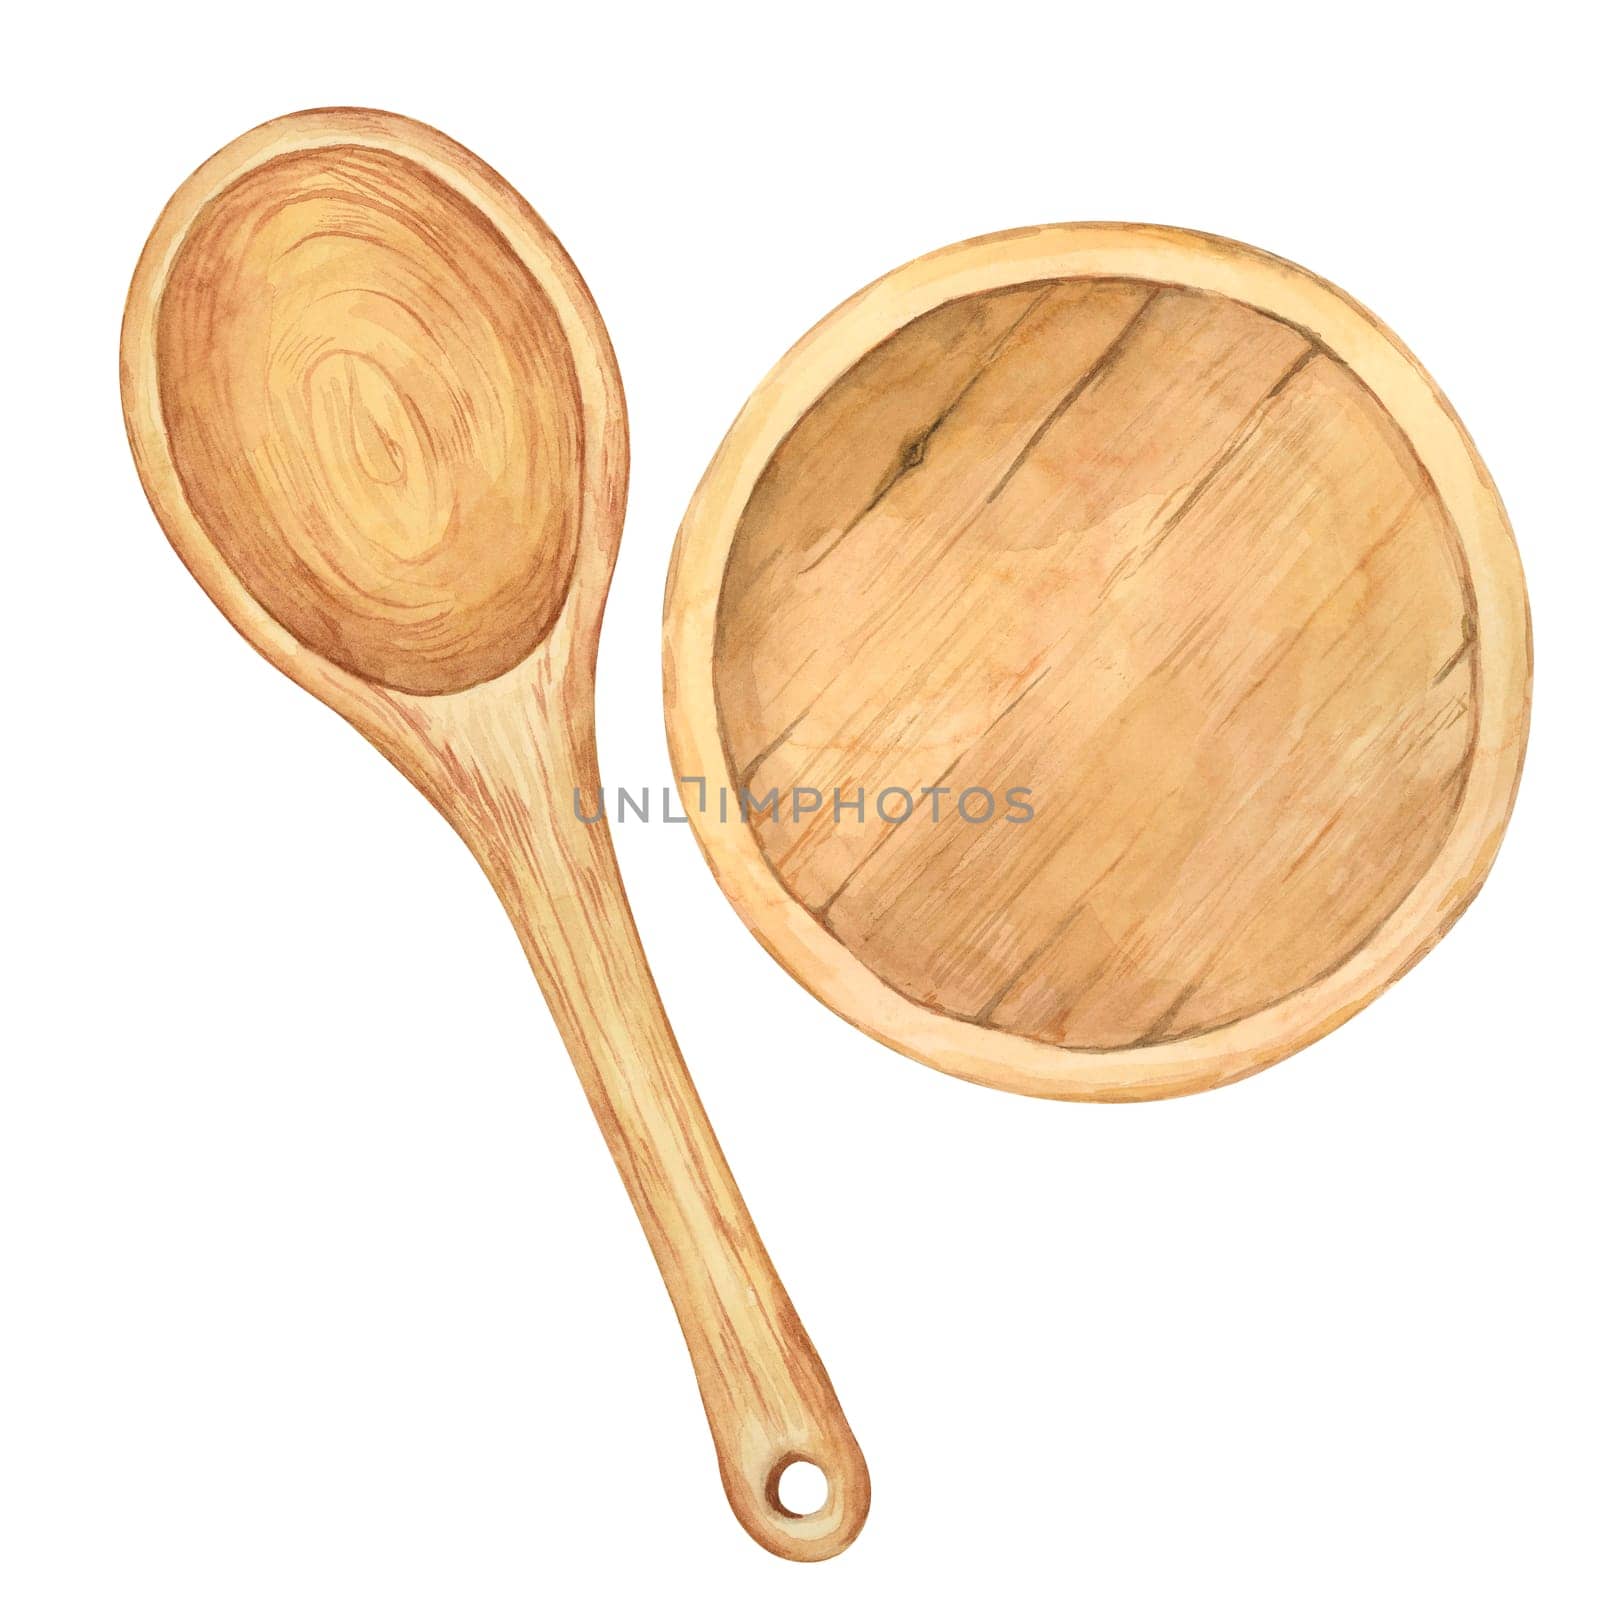 Wooden spoon and plate in watercolor by Fofito